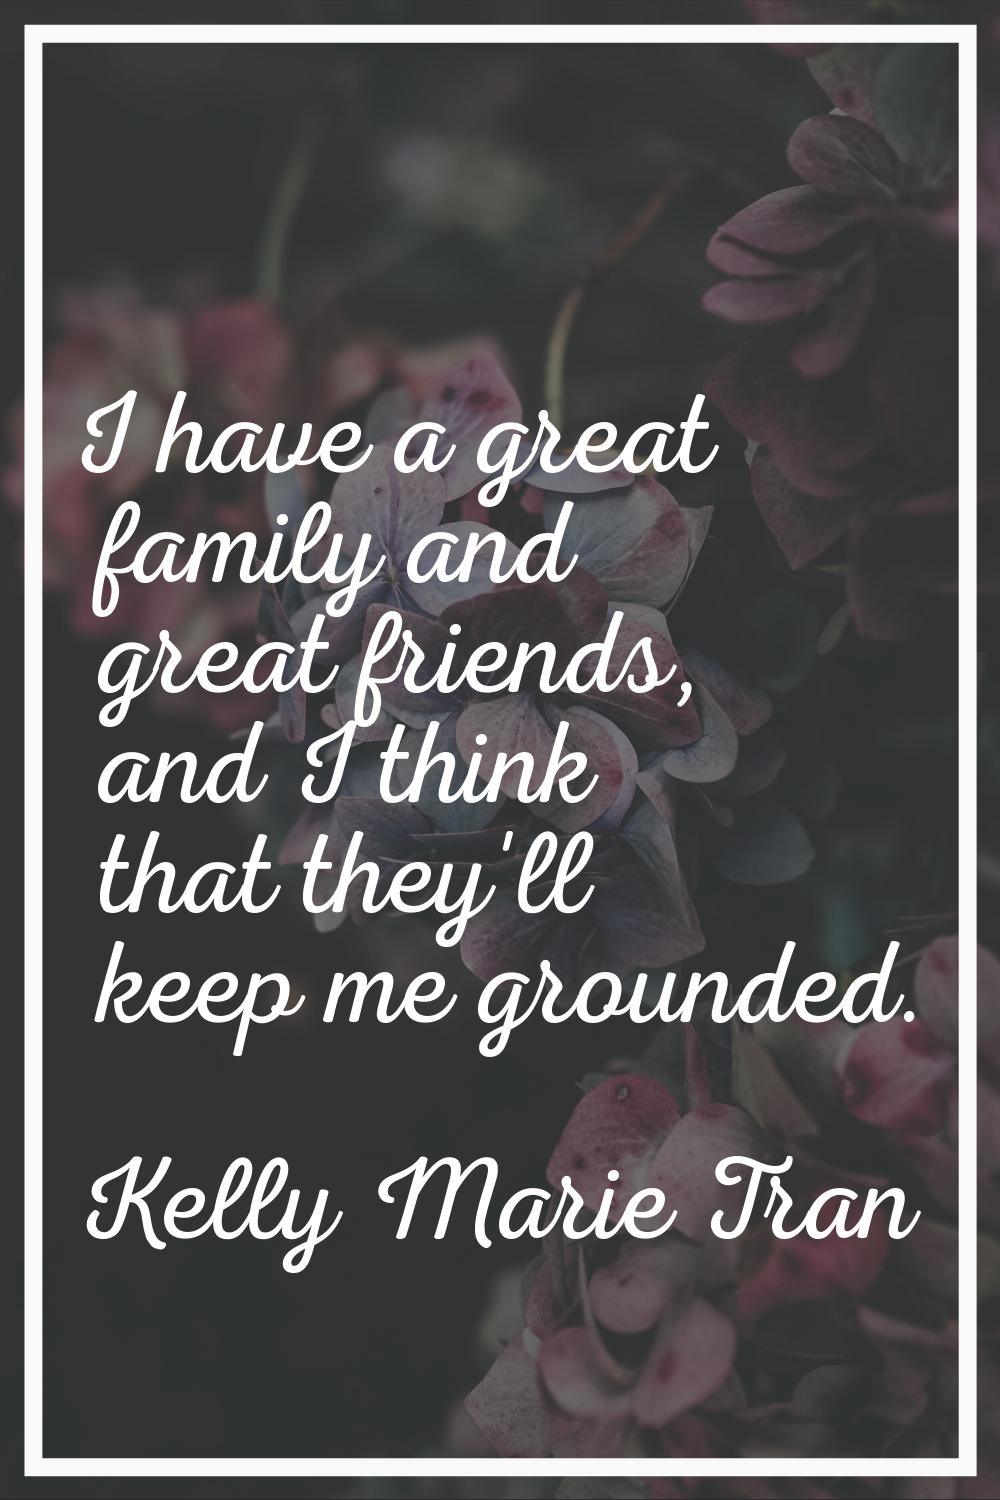 I have a great family and great friends, and I think that they'll keep me grounded.